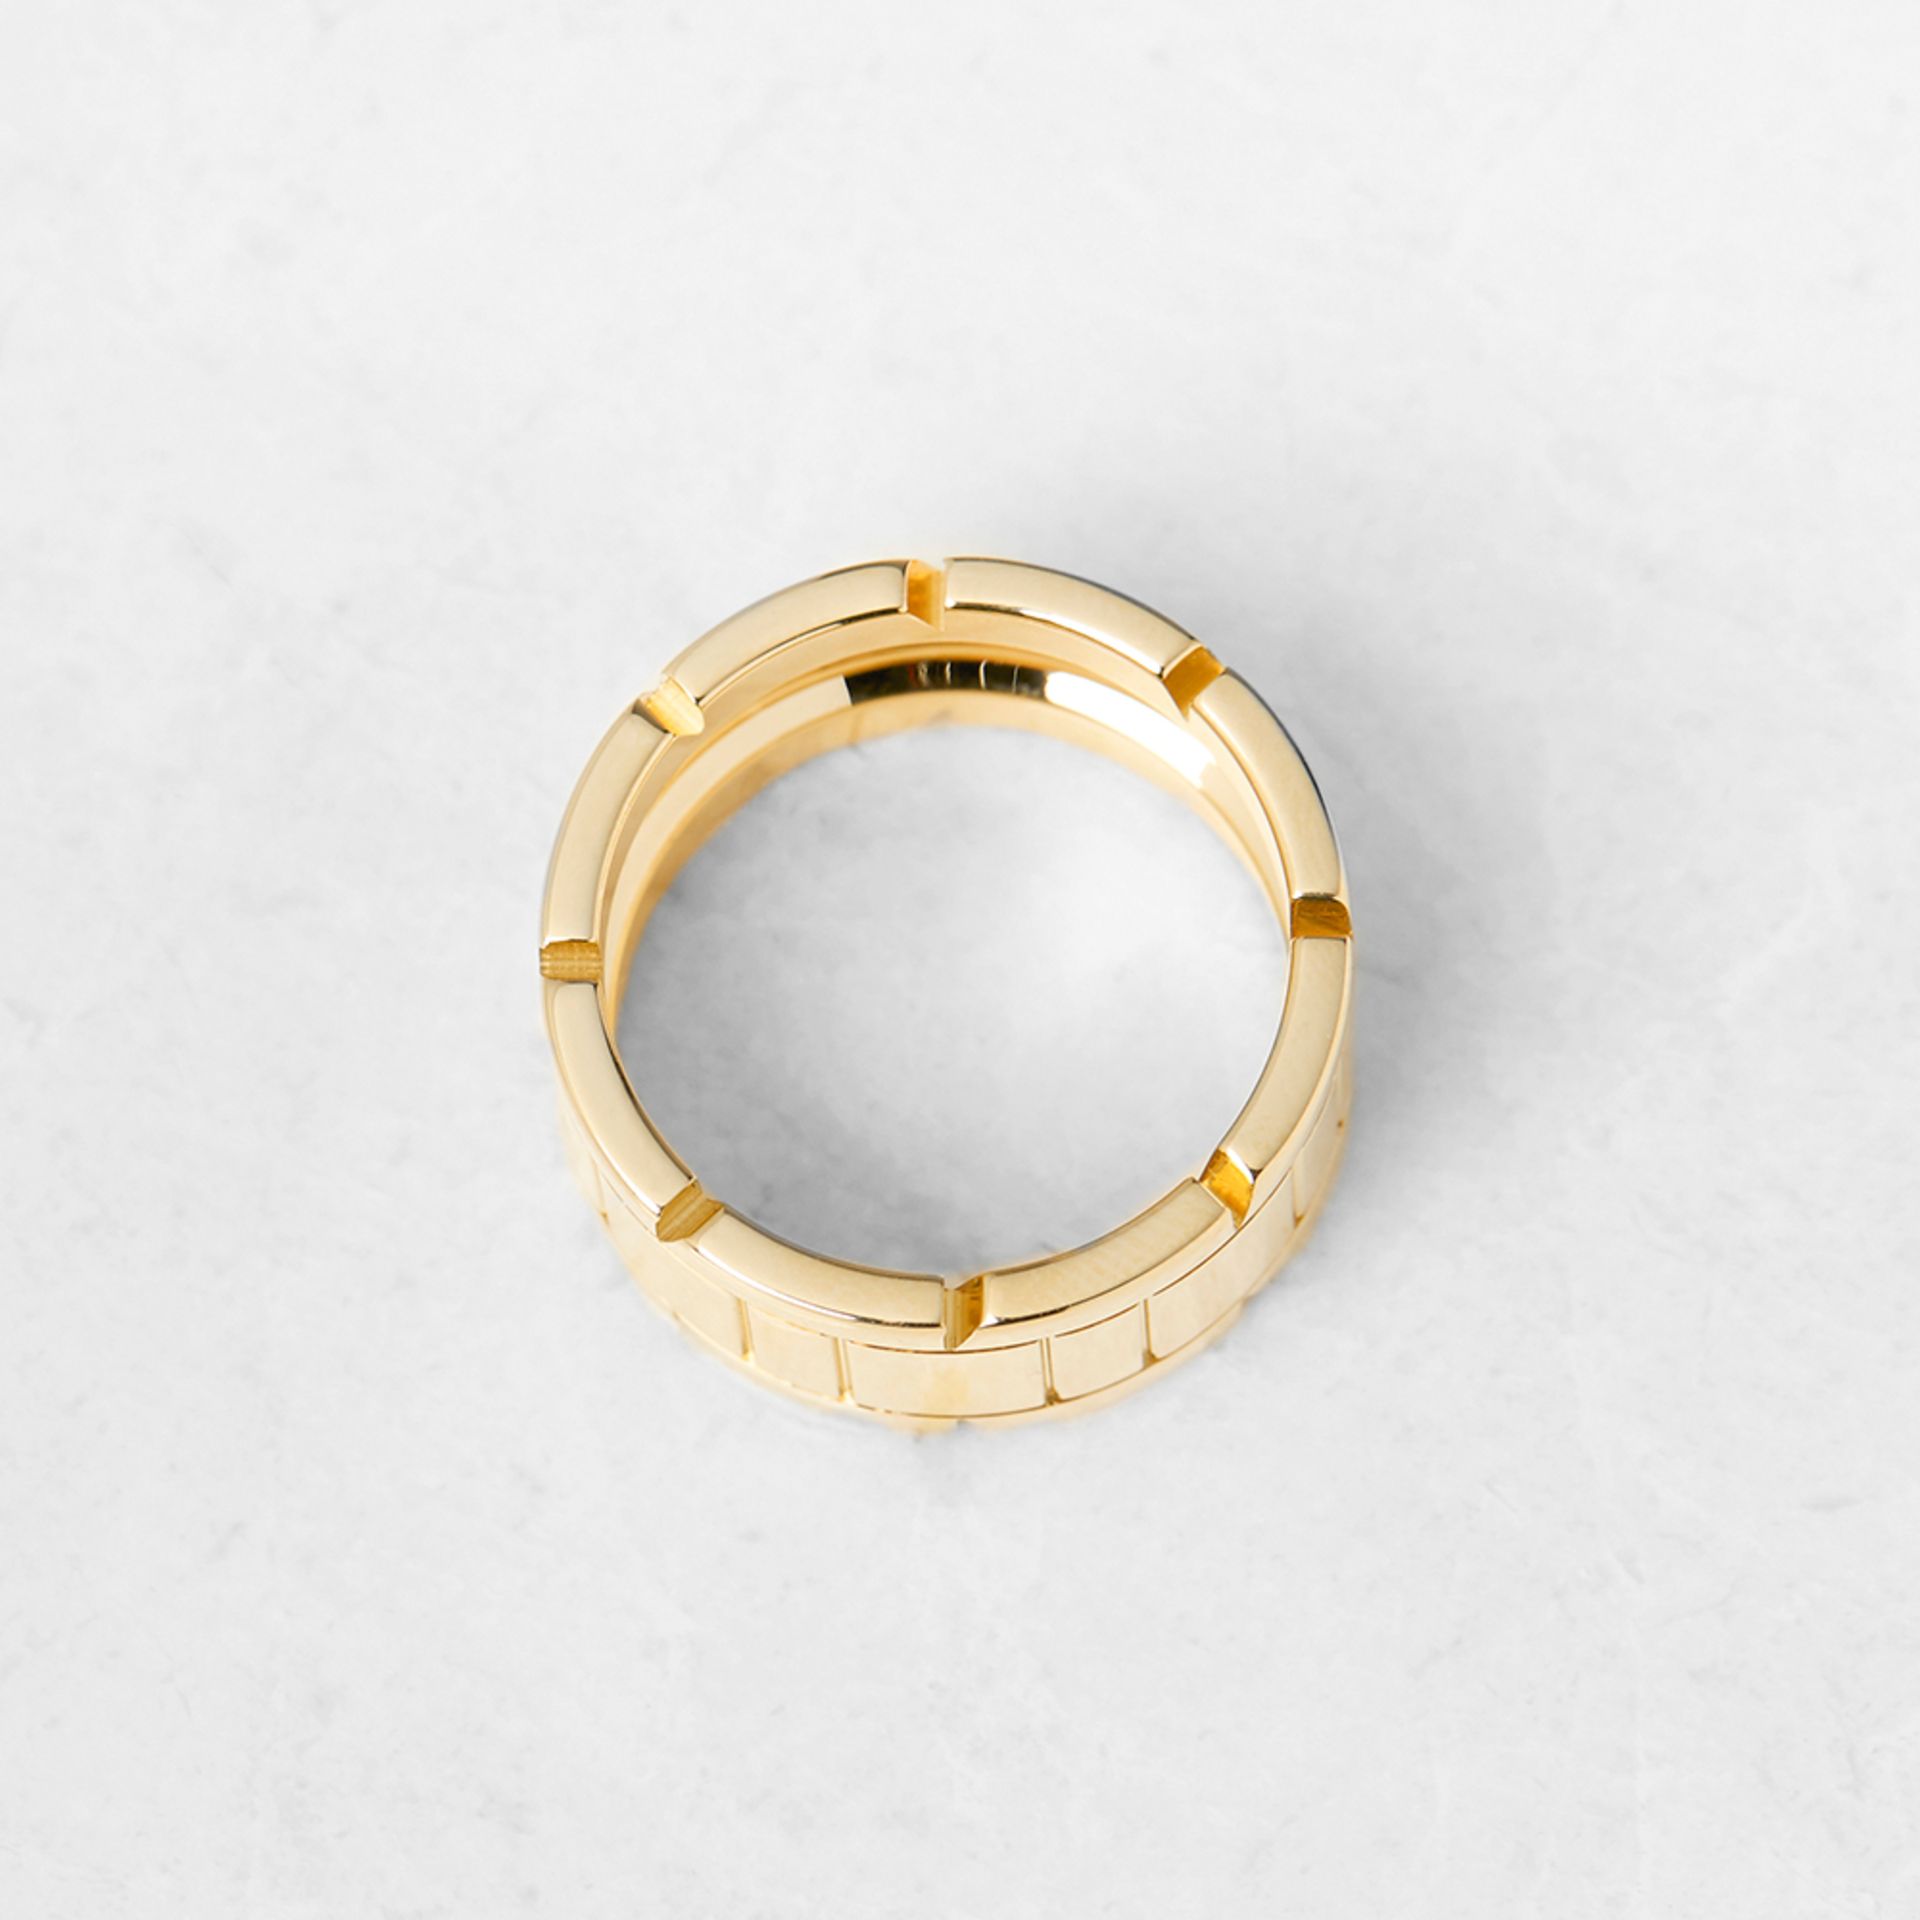 Cartier 18k Yellow Gold Tank Francaise Ring - Image 3 of 8